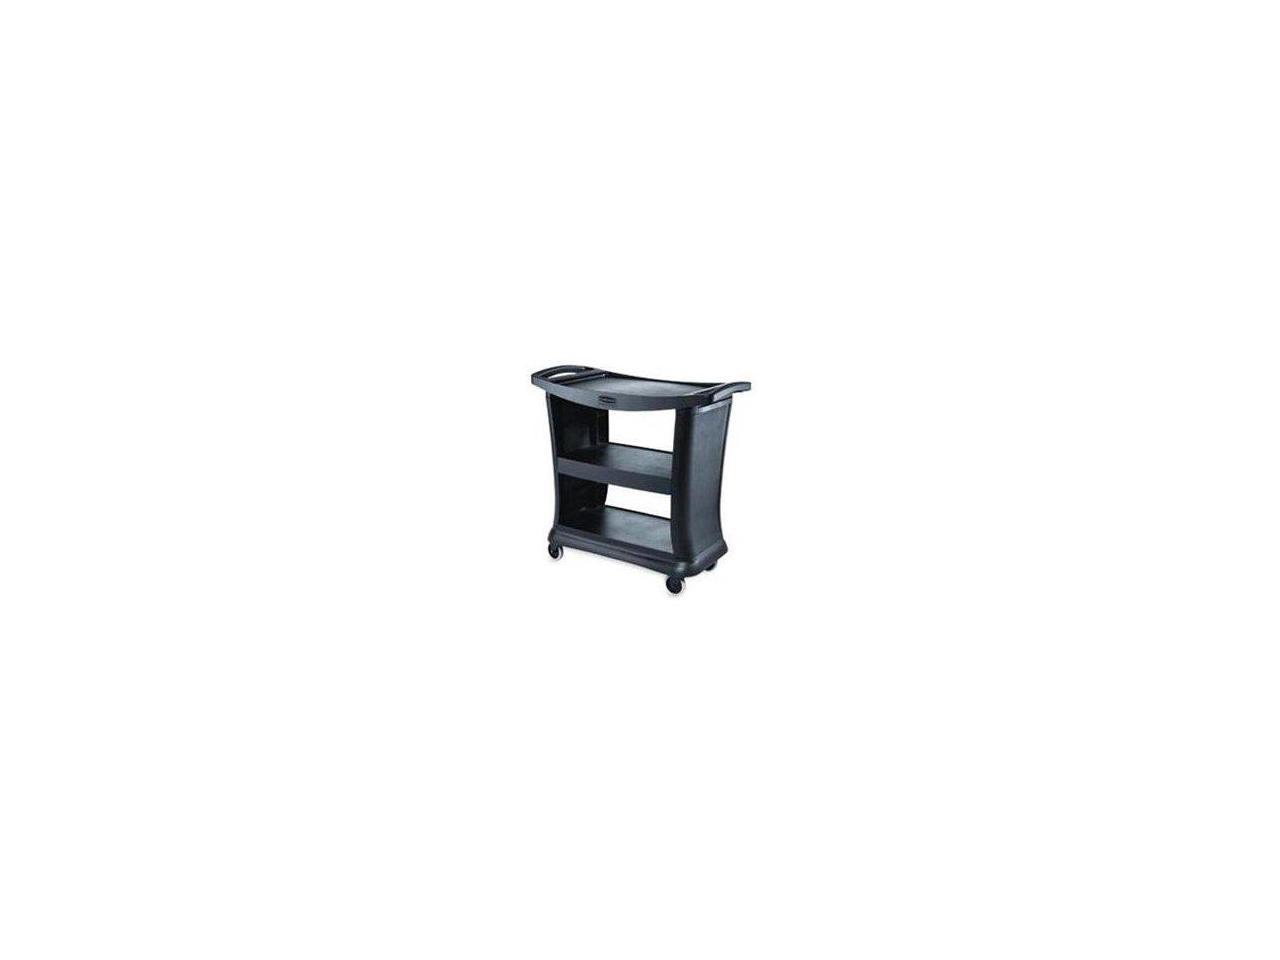 Rubbermaid Commercial Executive Service Cart, Three-Shelf, 20.33w x 38.9d x 38.9 h, Black -RCP9T6800BK - image 4 of 5